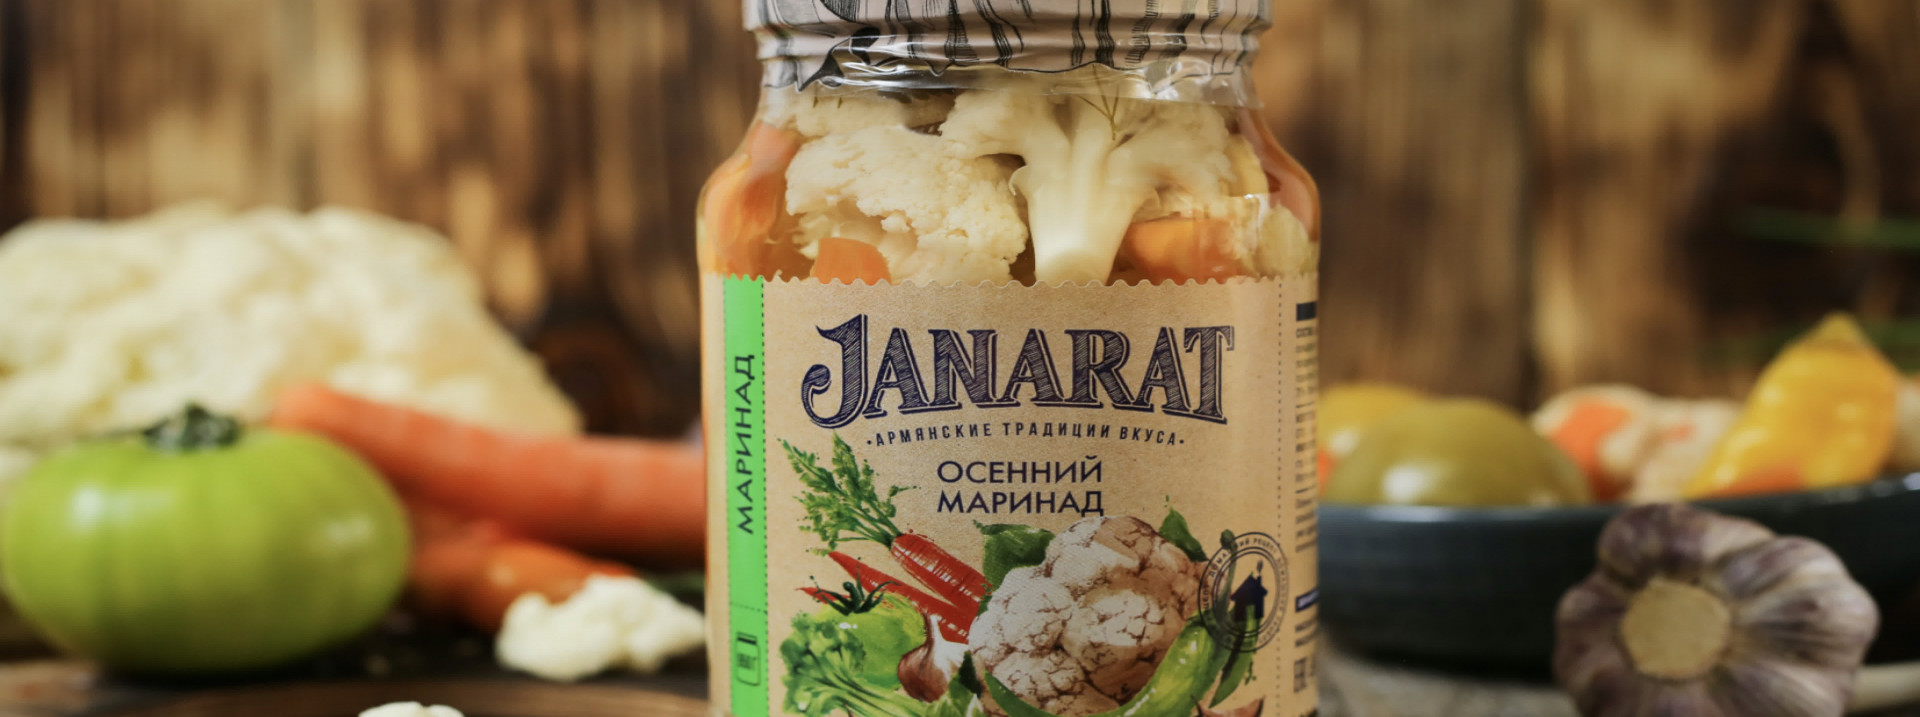 Packaging design for a line of natural preservation from Armenia JANARAT